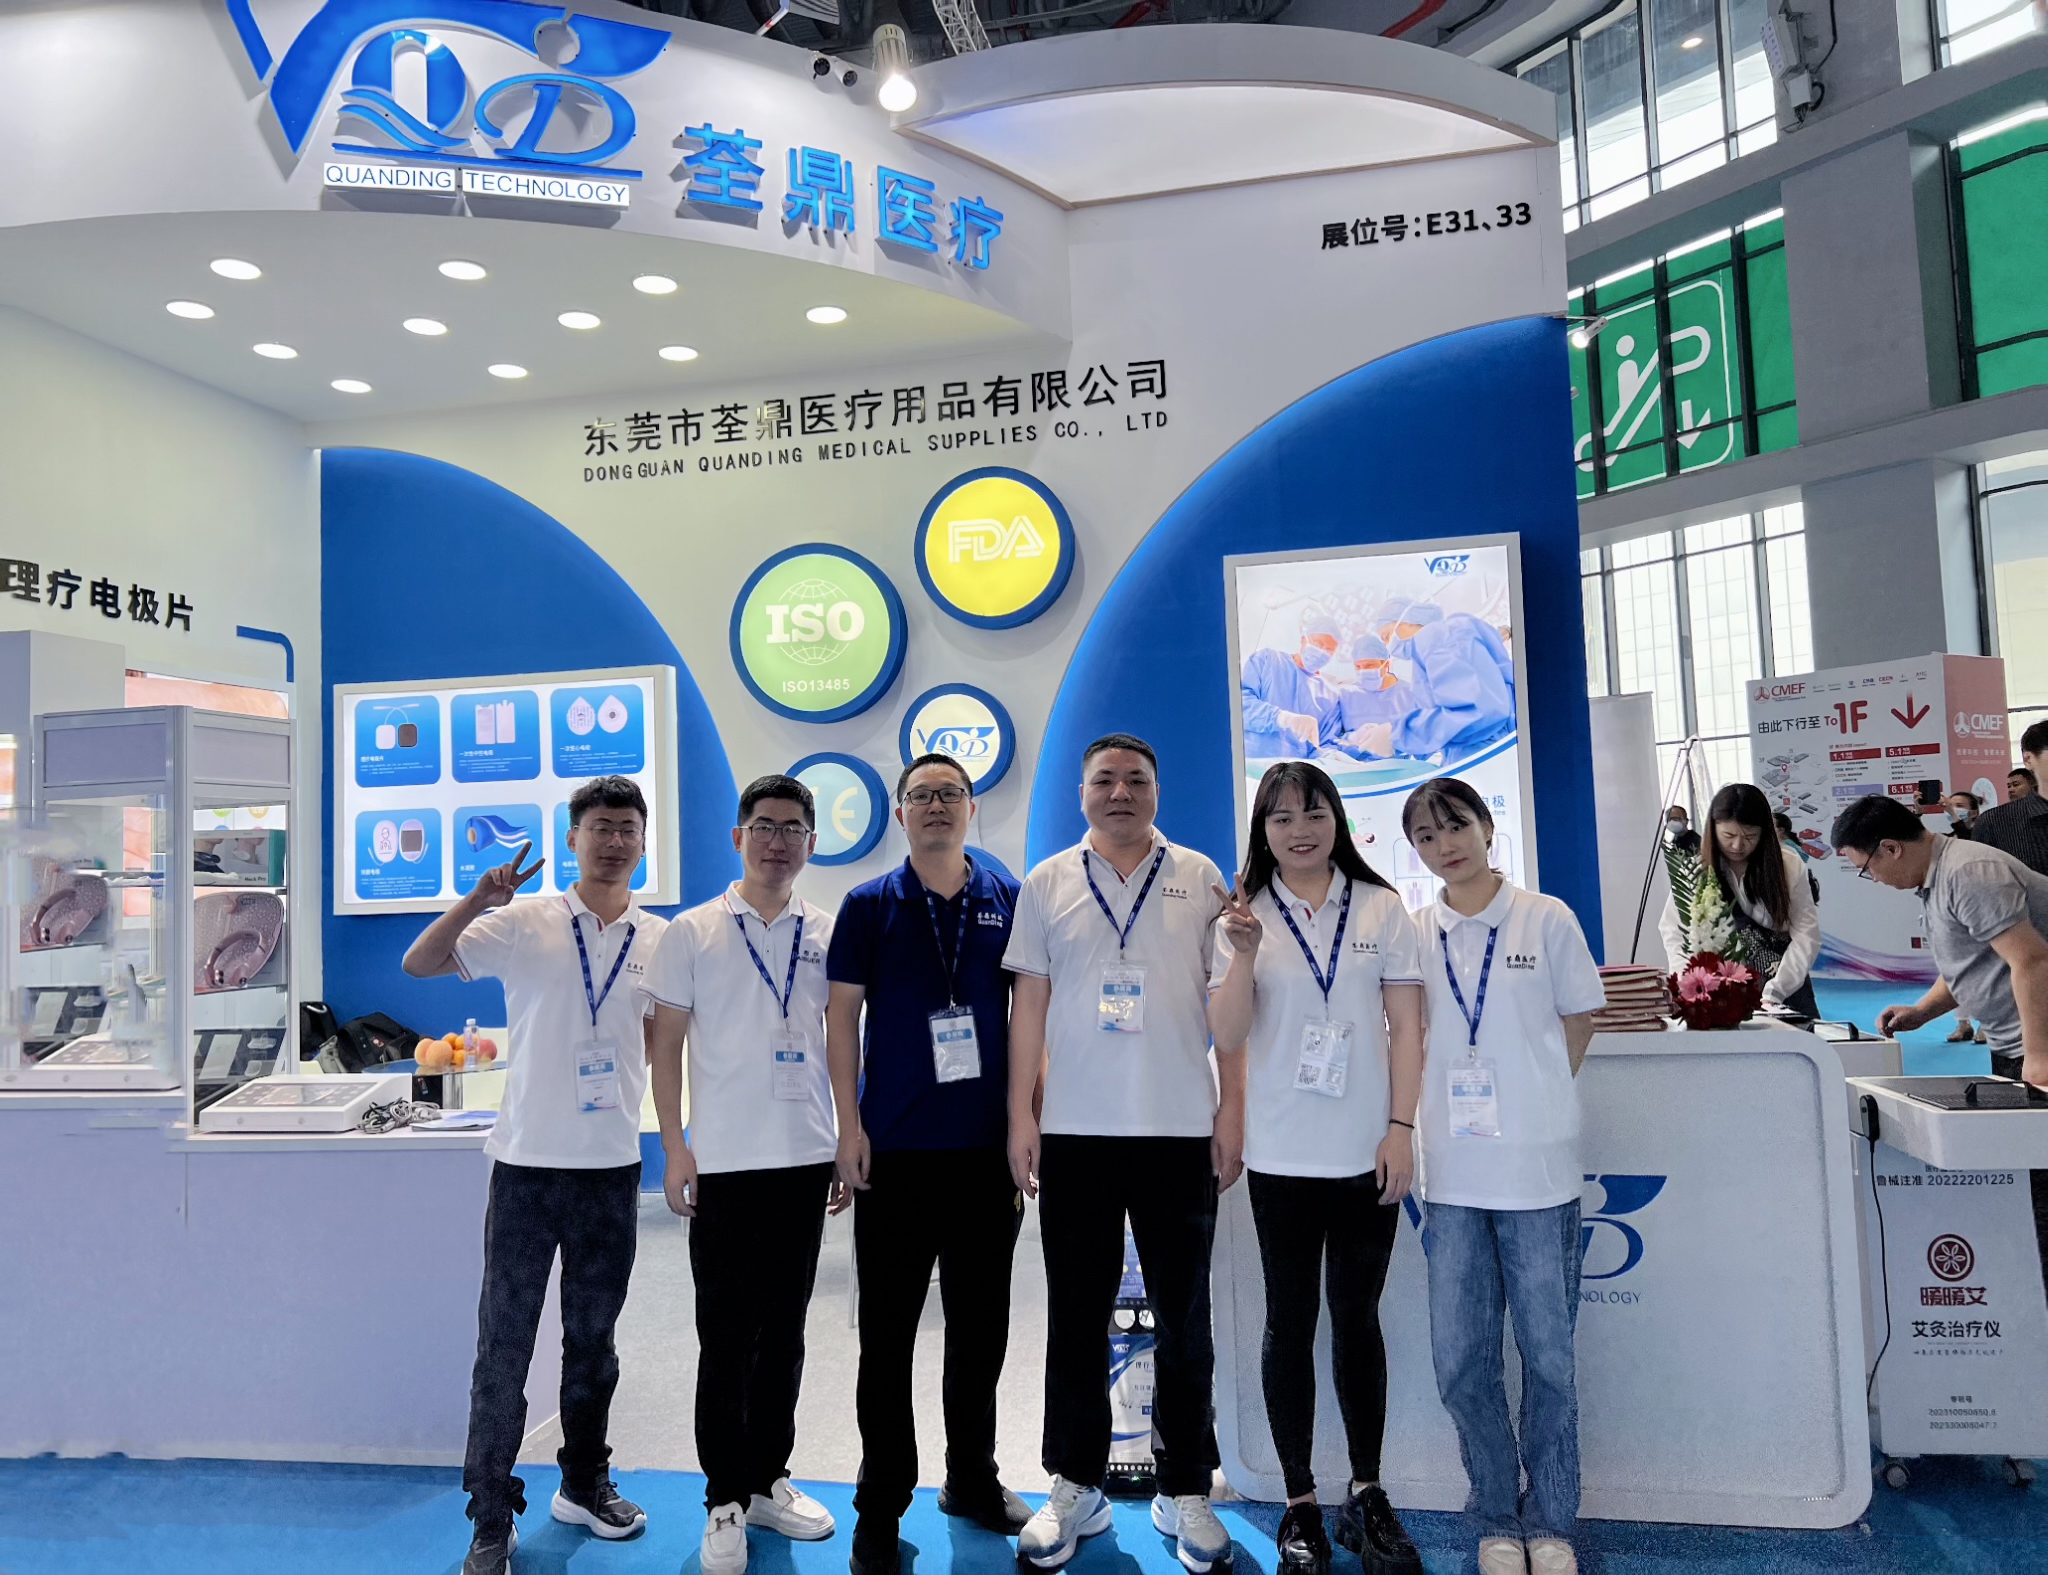 Quanding Medical Participated in the Shanghai CMEF Exhibition